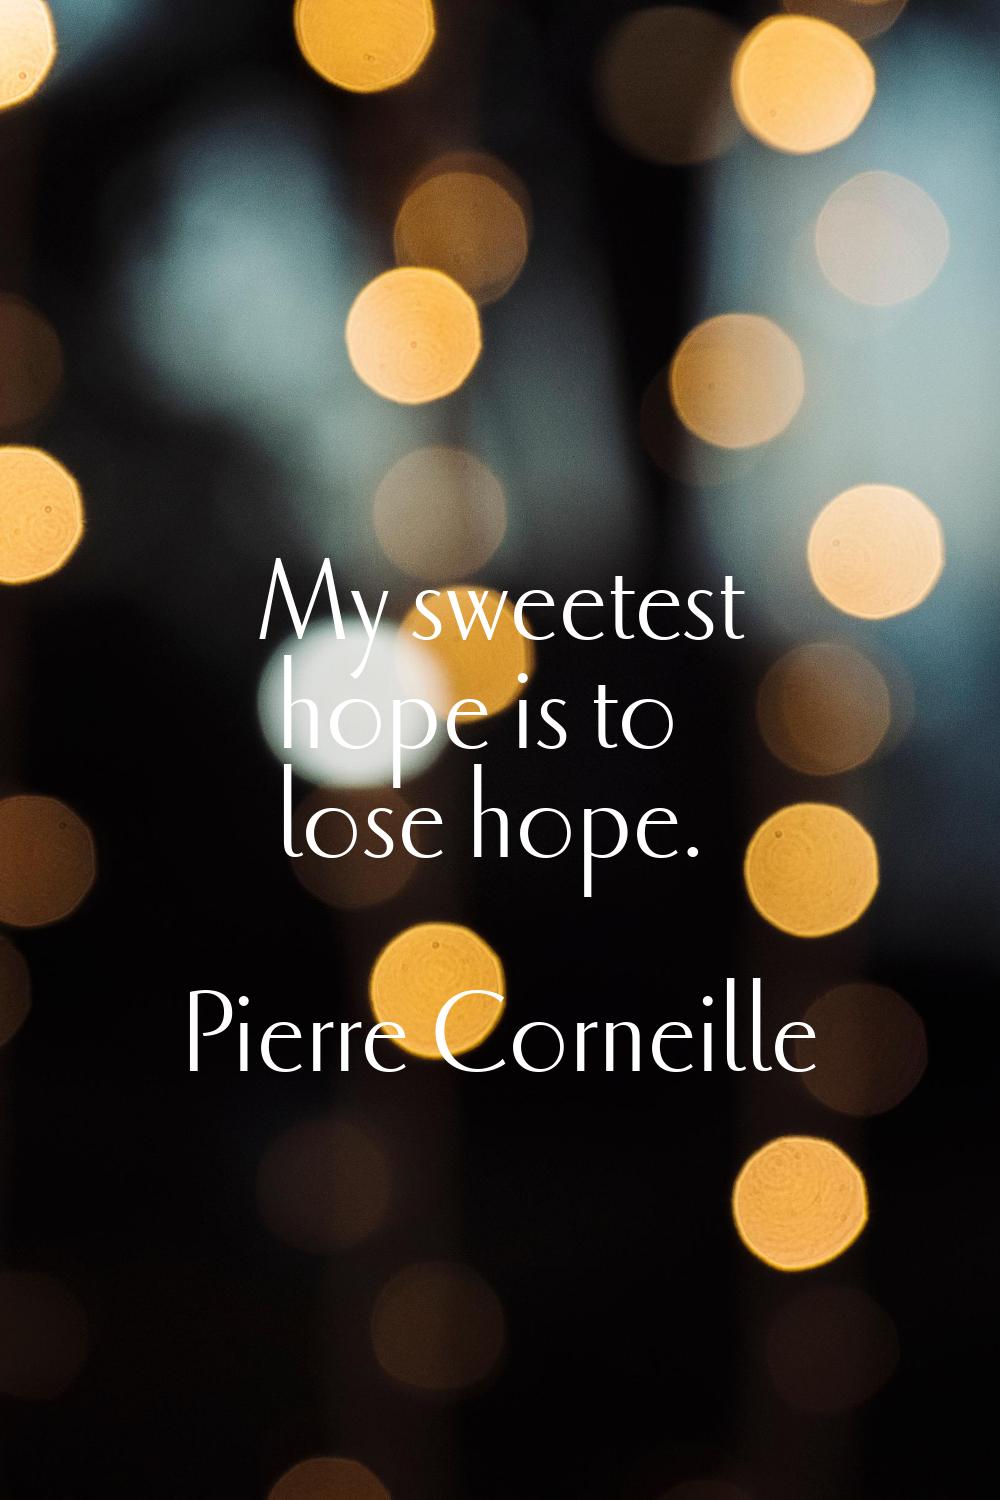 My sweetest hope is to lose hope.